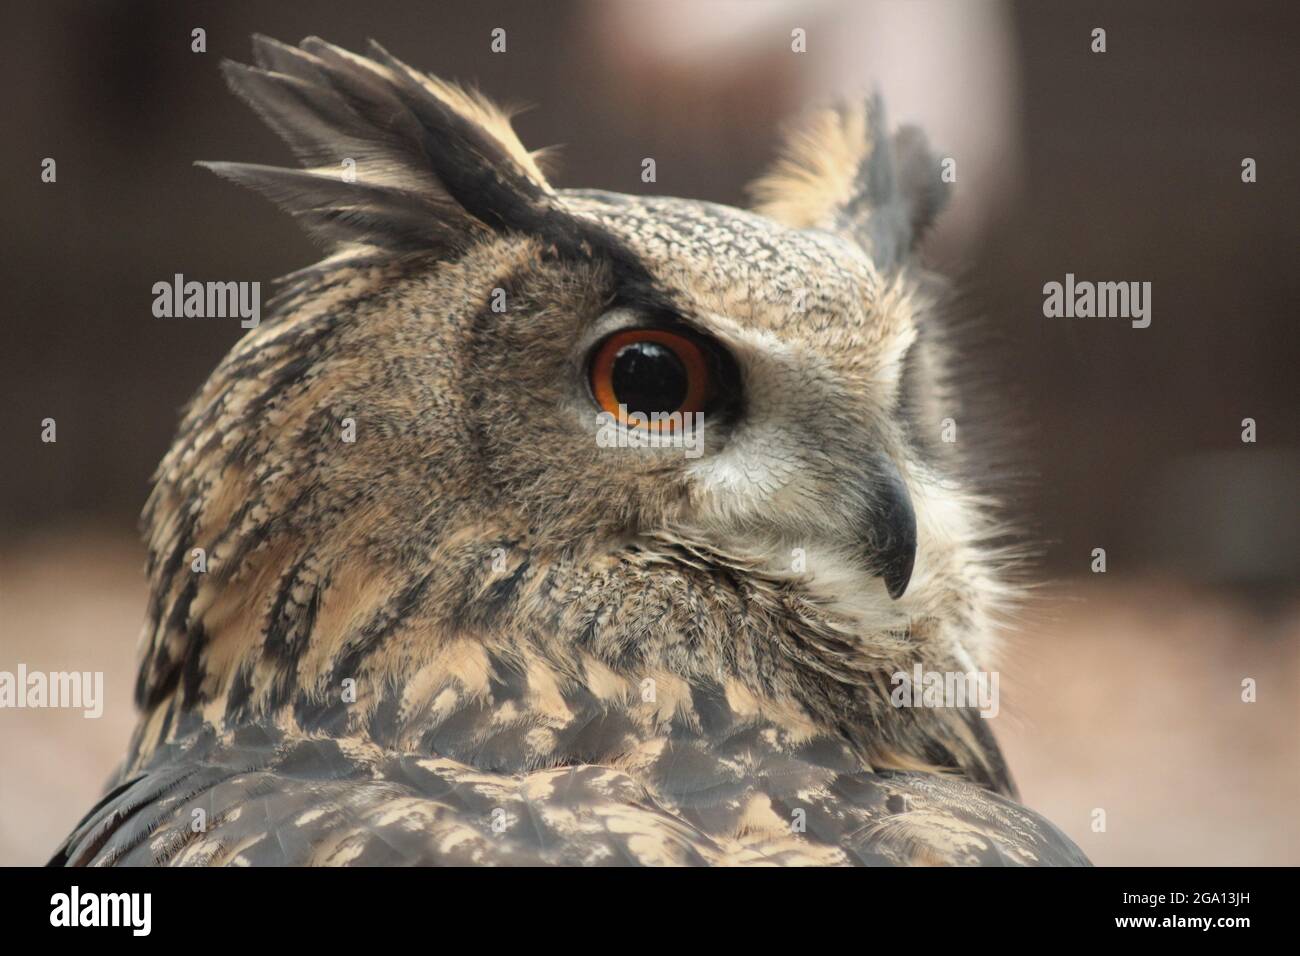 Close up of head of owl Stock Photo